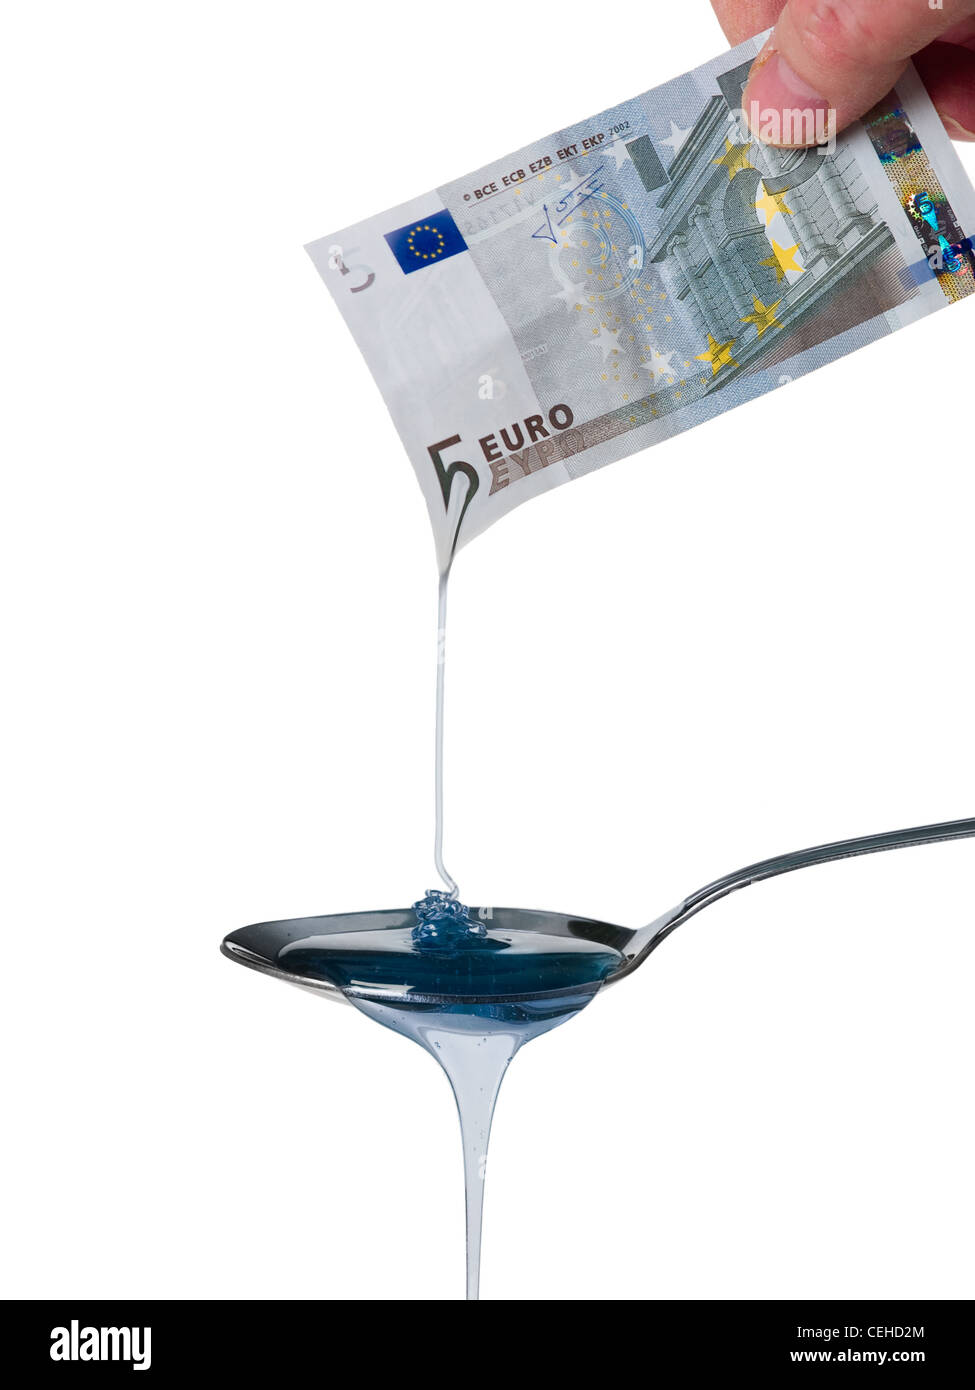 A 5 Euro banknote melting into a spoon. Stock Photo